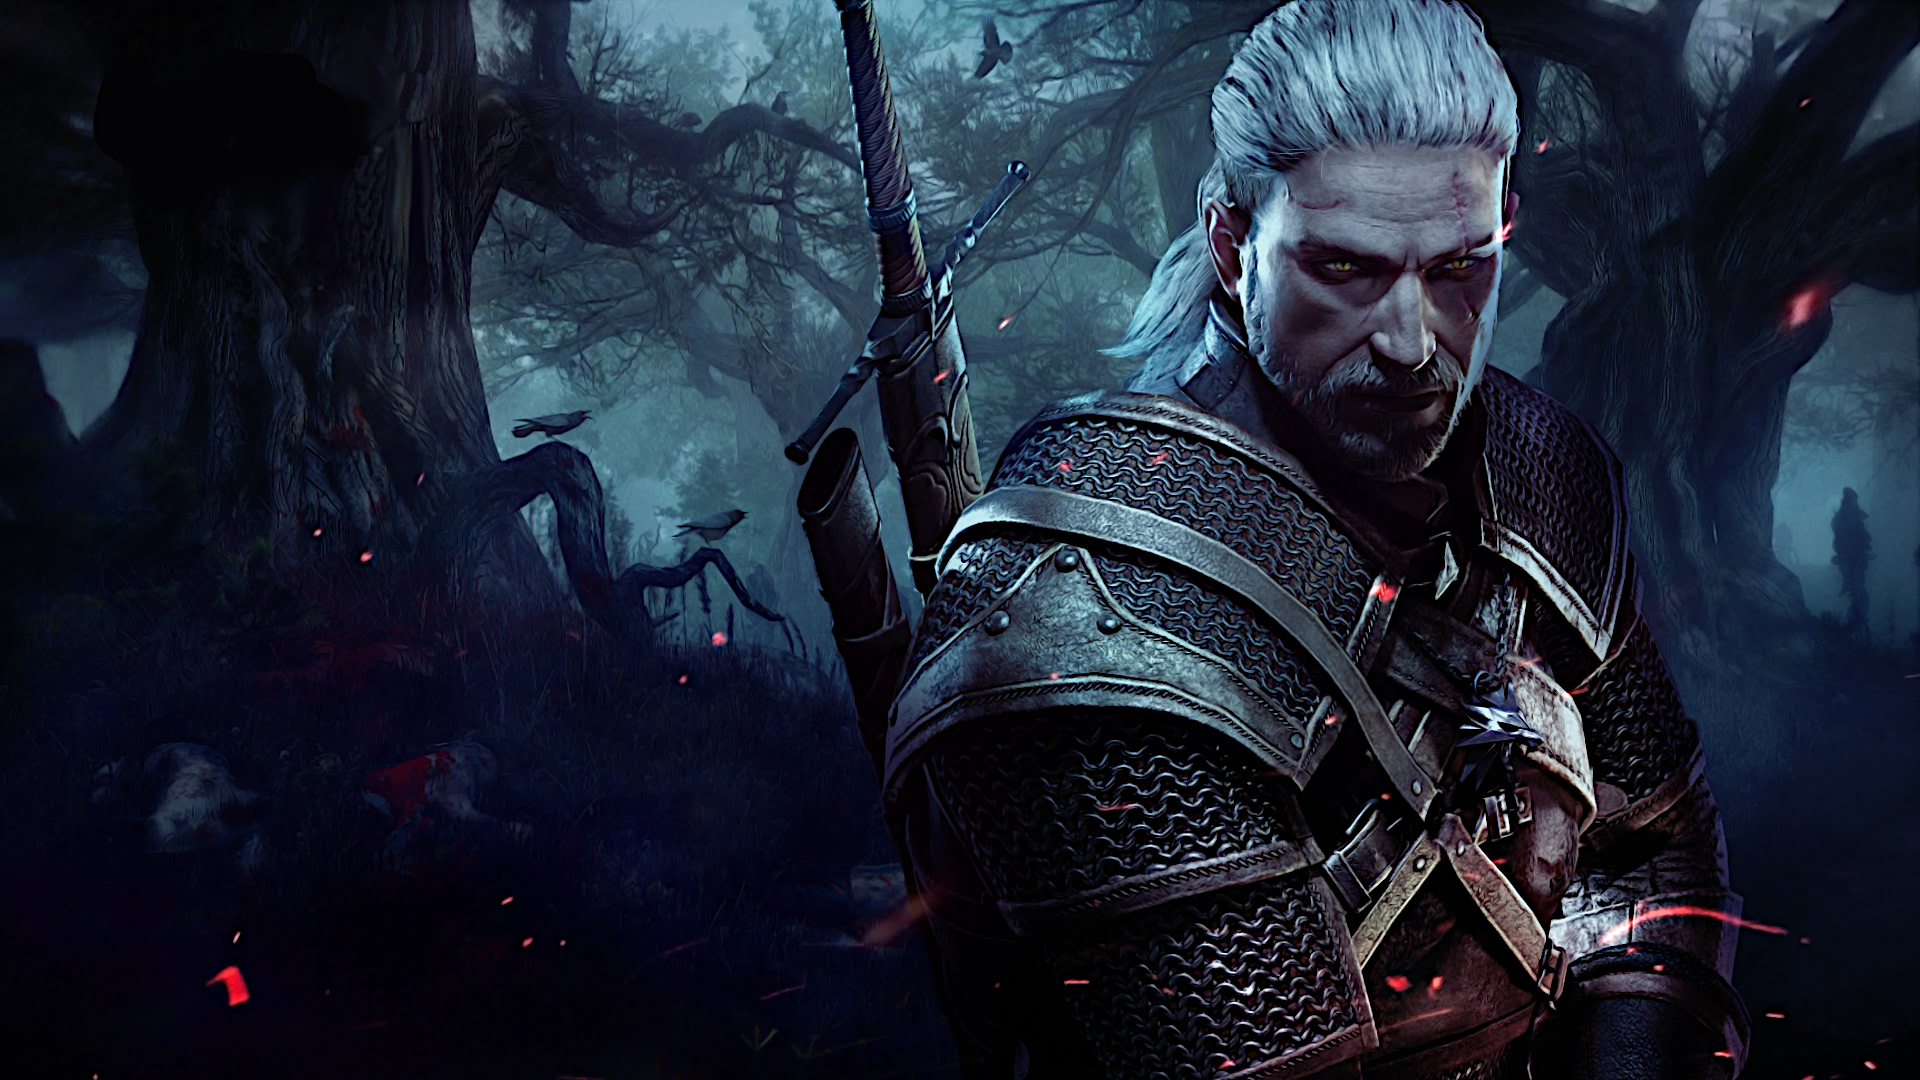 Image for The Witcher 3's latest patch improves overall stability and performance, makes other fixes